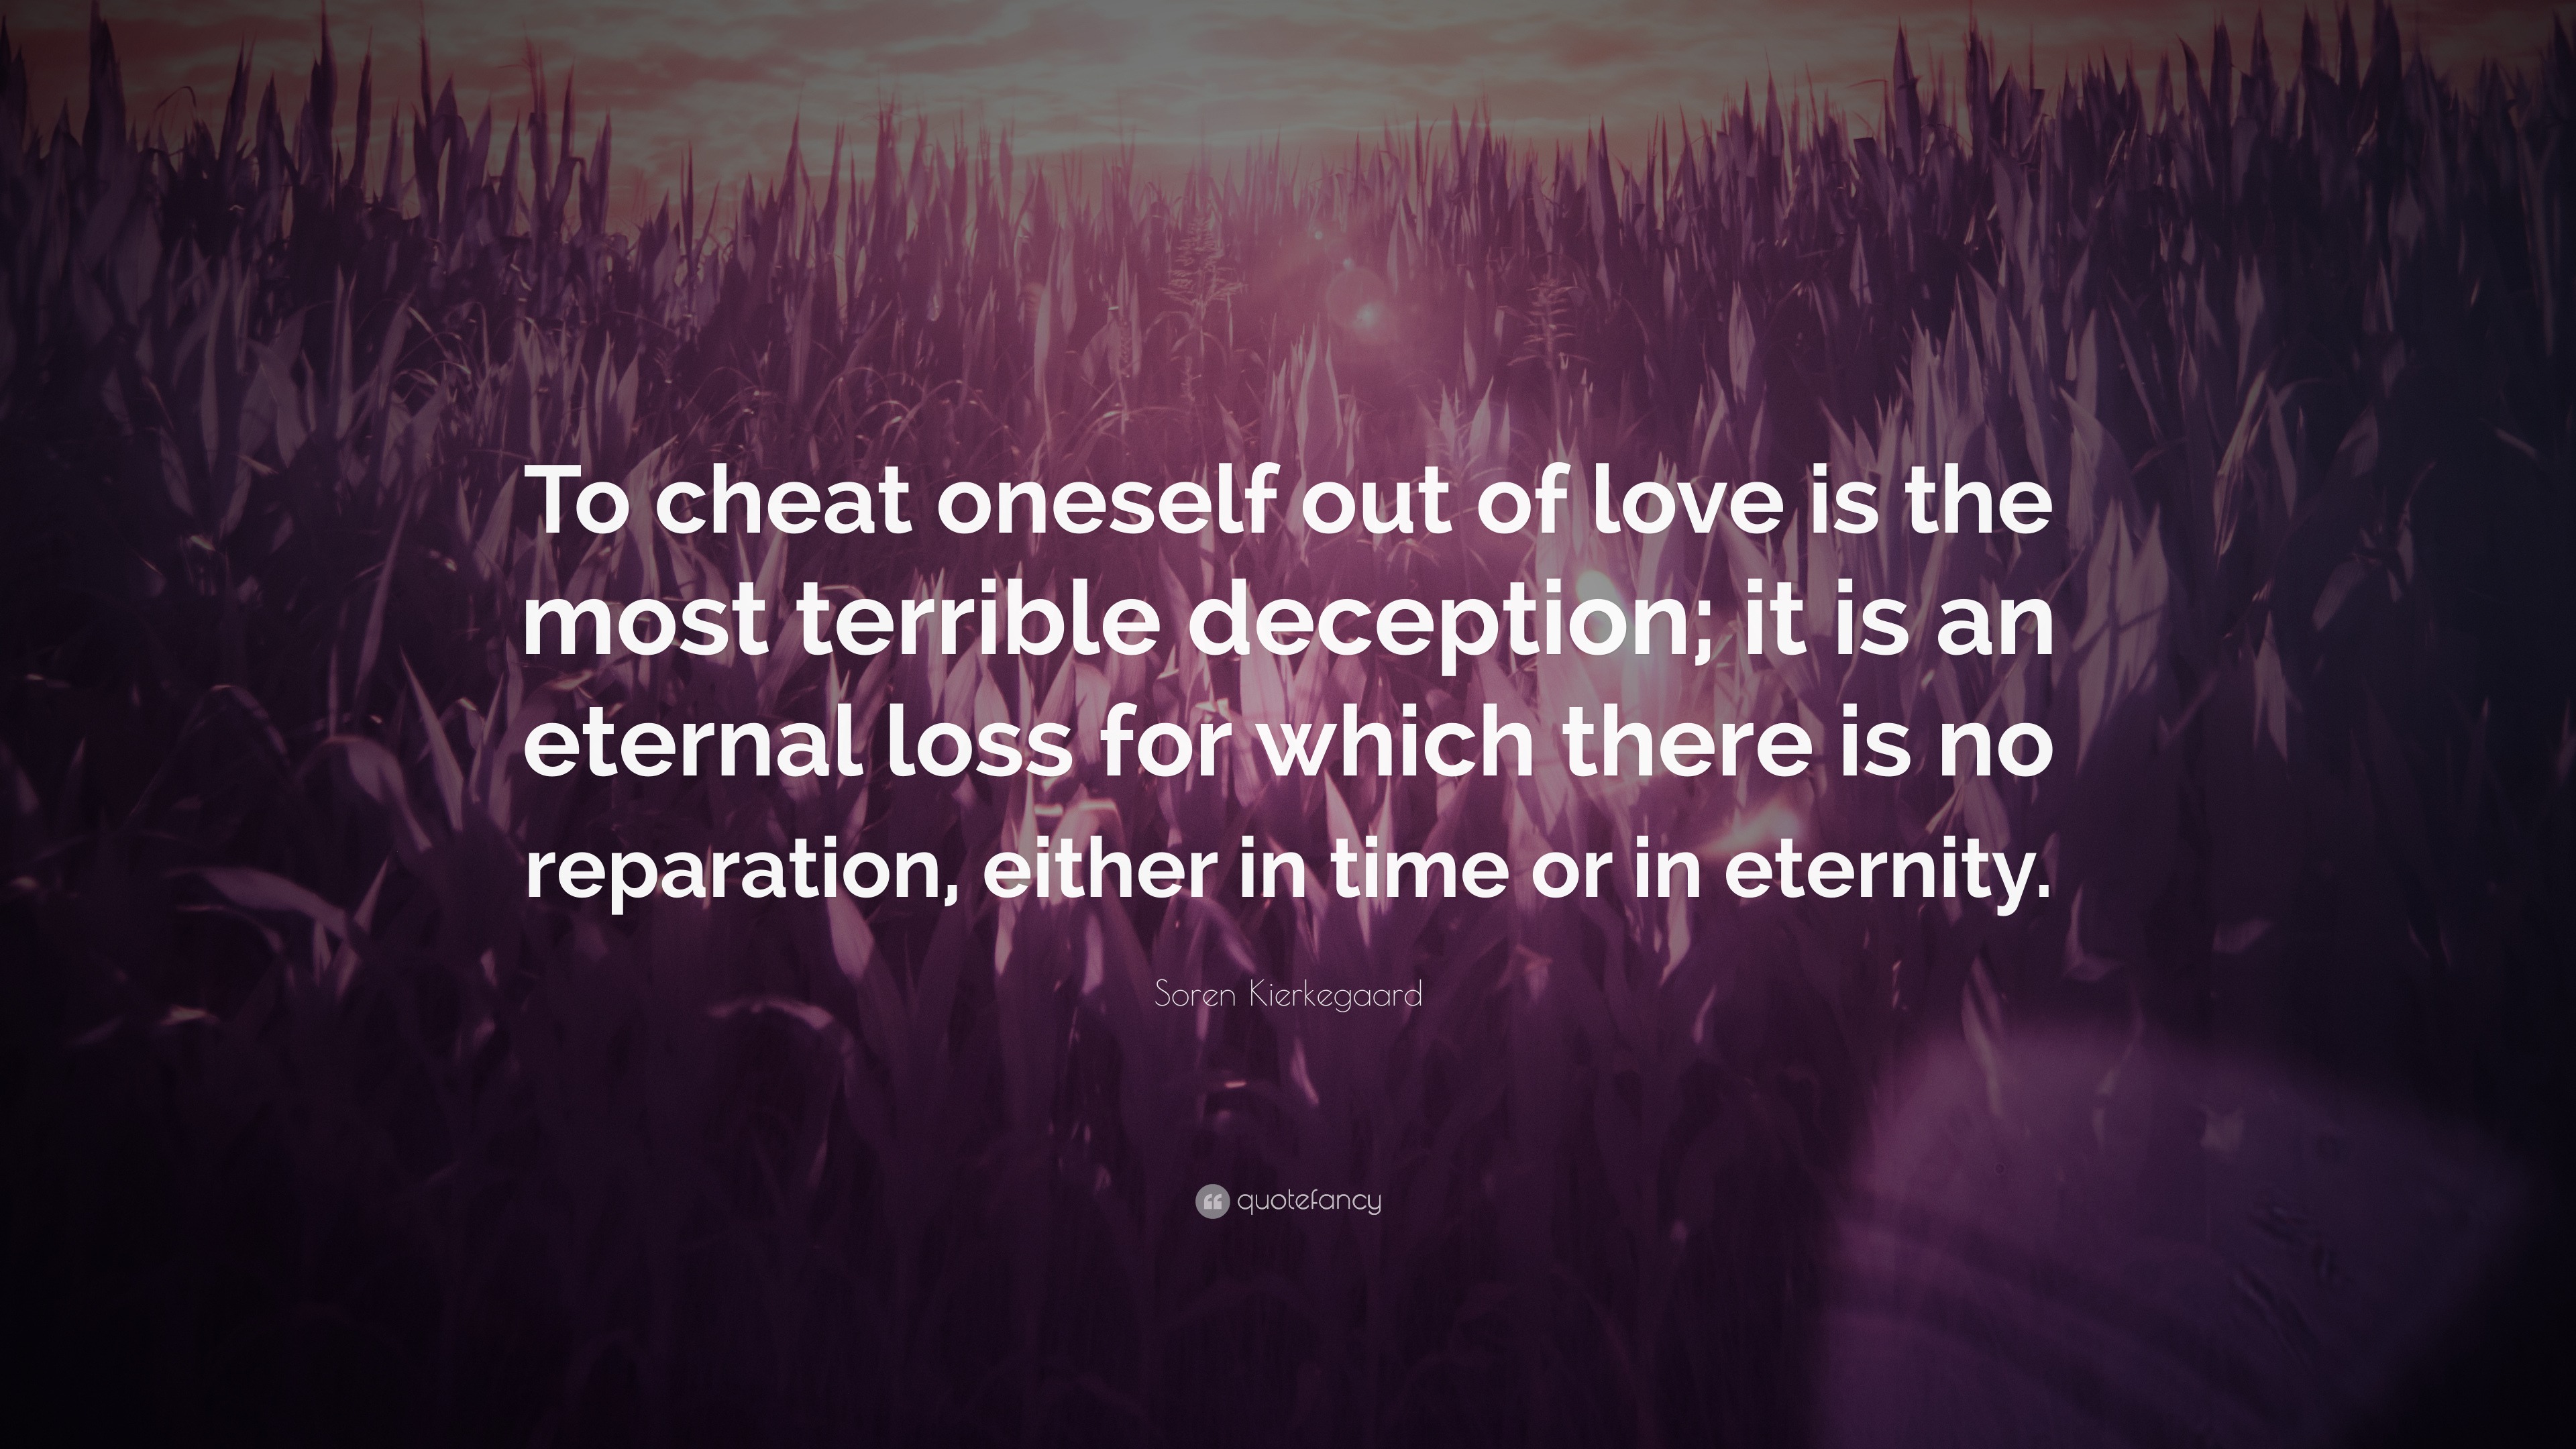 Soren Kierkegaard Quote: “To cheat oneself out of love is the most terrible  deception; it is an eternal loss for which there is no reparation, eit...”